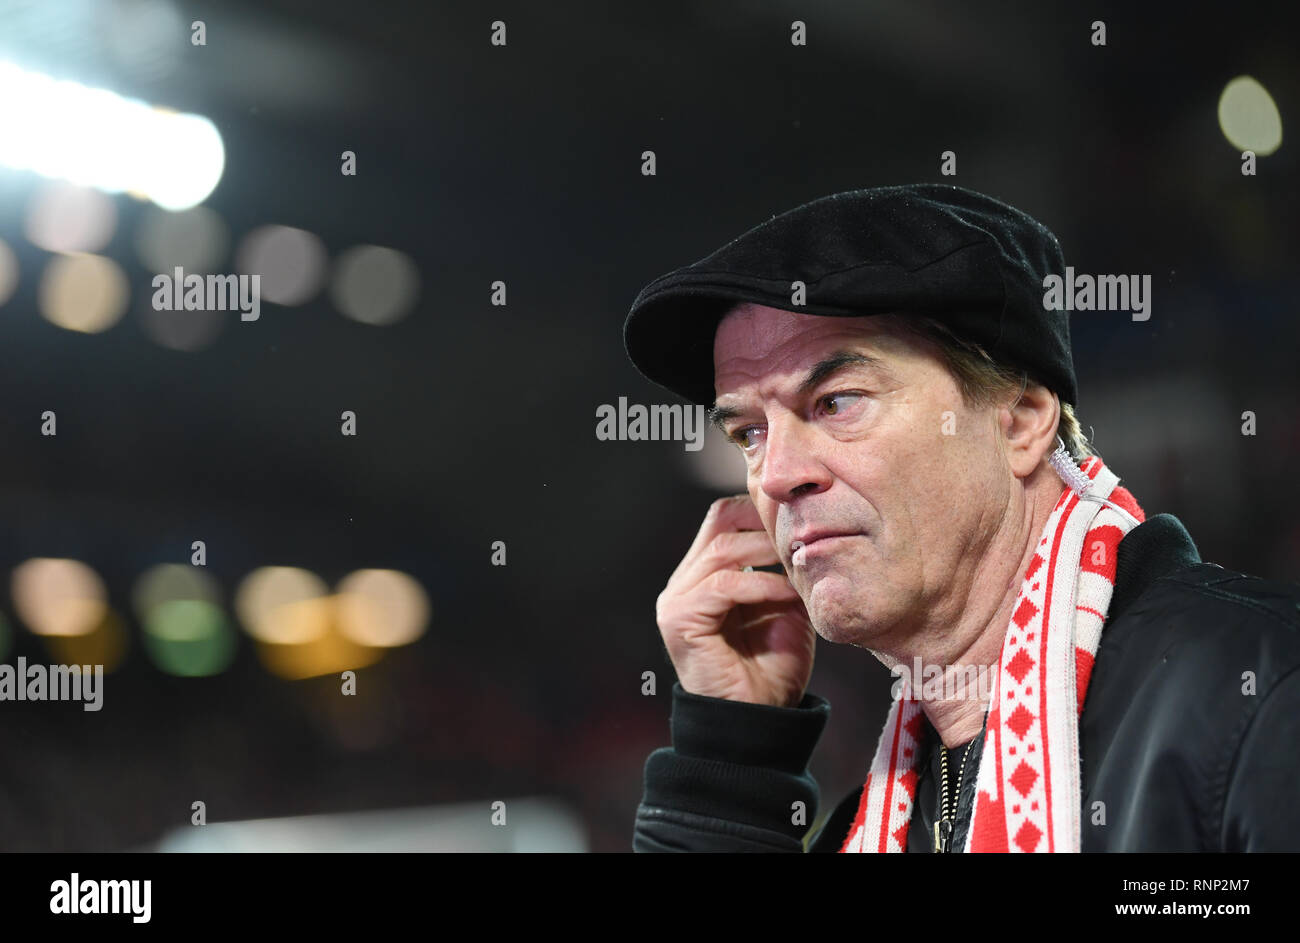 Liverpool, UK. 19th Feb, 2019. Soccer: Champions League, FC Liverpool -  Bayern Munich, knockout round, round of sixteen, first leg in Anfield  Stadium. Campino, singer of the band "Die Toten Hosen", and